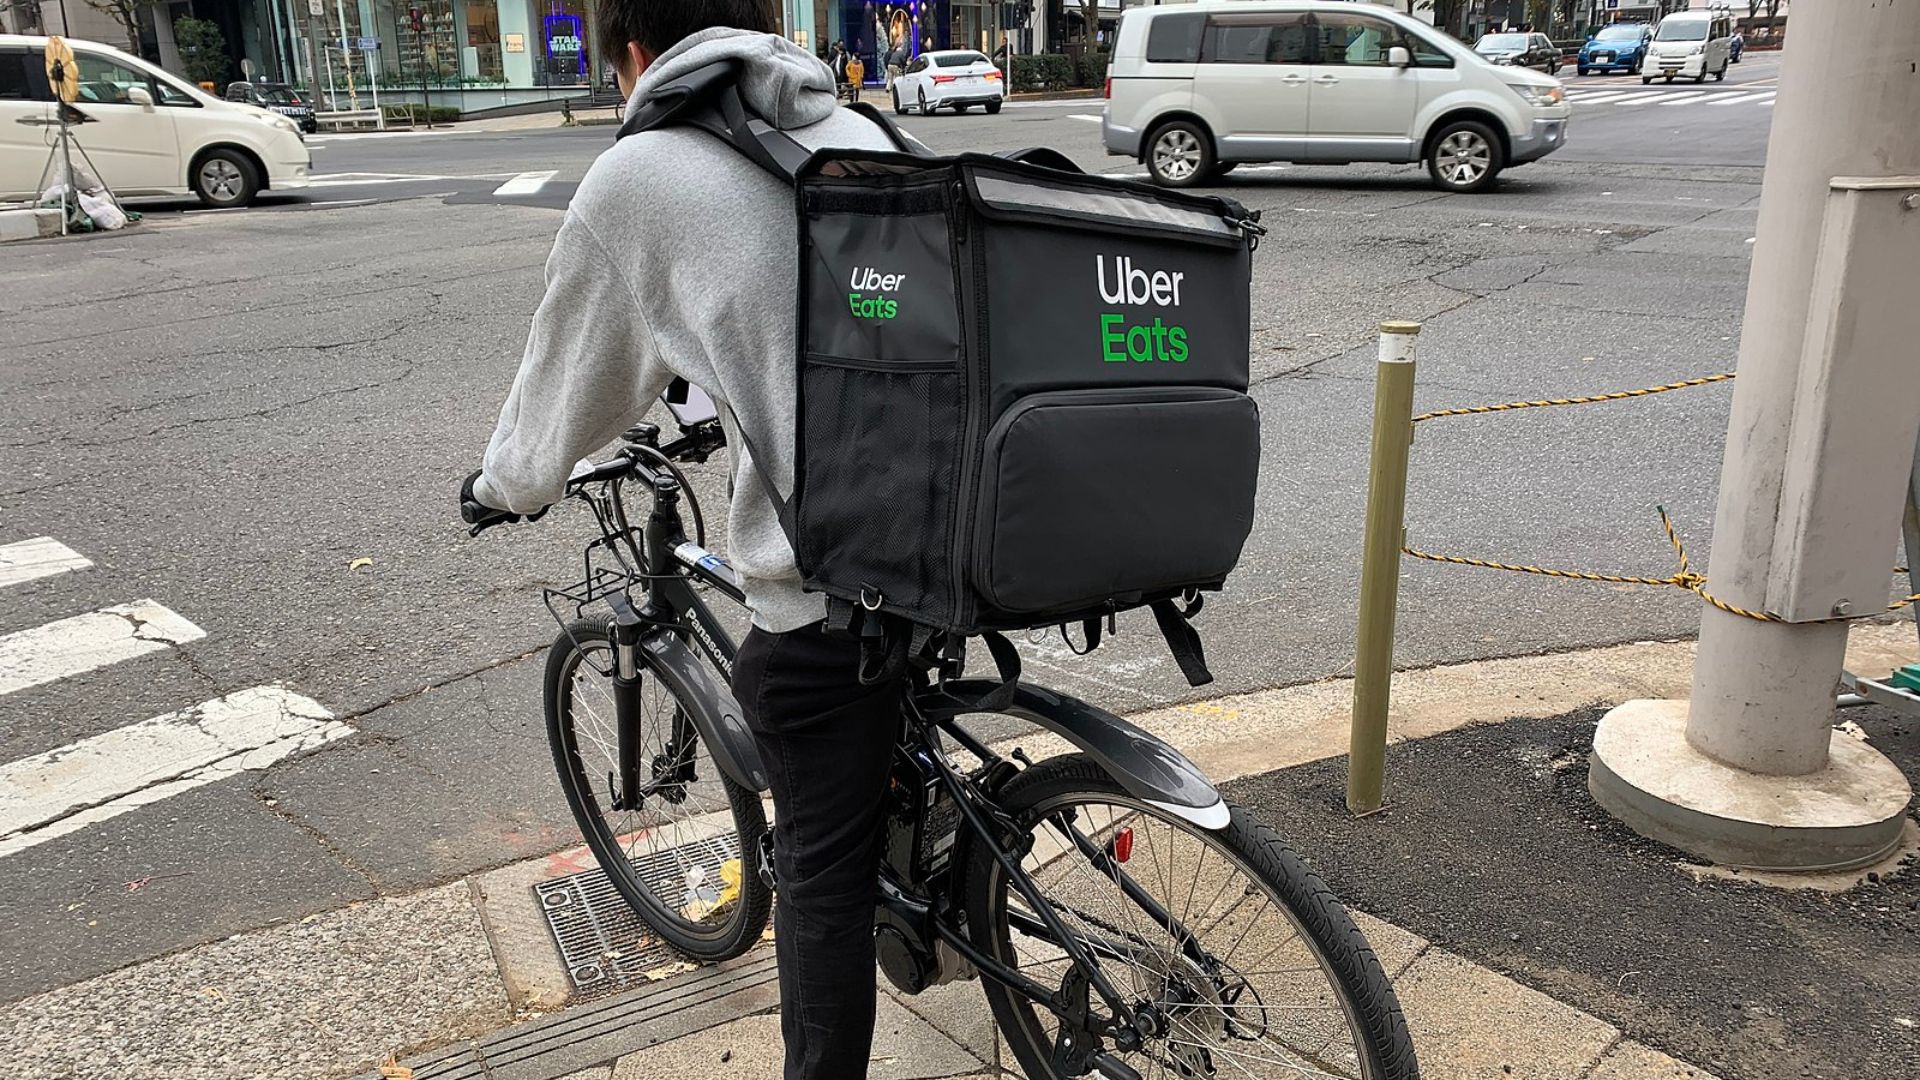 <p>Following the implementation of the new wage law, Uber reported a <a href="https://www.newsweek.com/20-minimum-wage-law-seattle-delivery-orders-1894785#:~:text=A%20law%20calling%20for%20a,went%20into%20effect%20in%202022.">30% decline</a> in delivery orders.     </p> <p>This significant decrease highlights the challenges faced by businesses and gig workers under the new economic conditions.    </p>